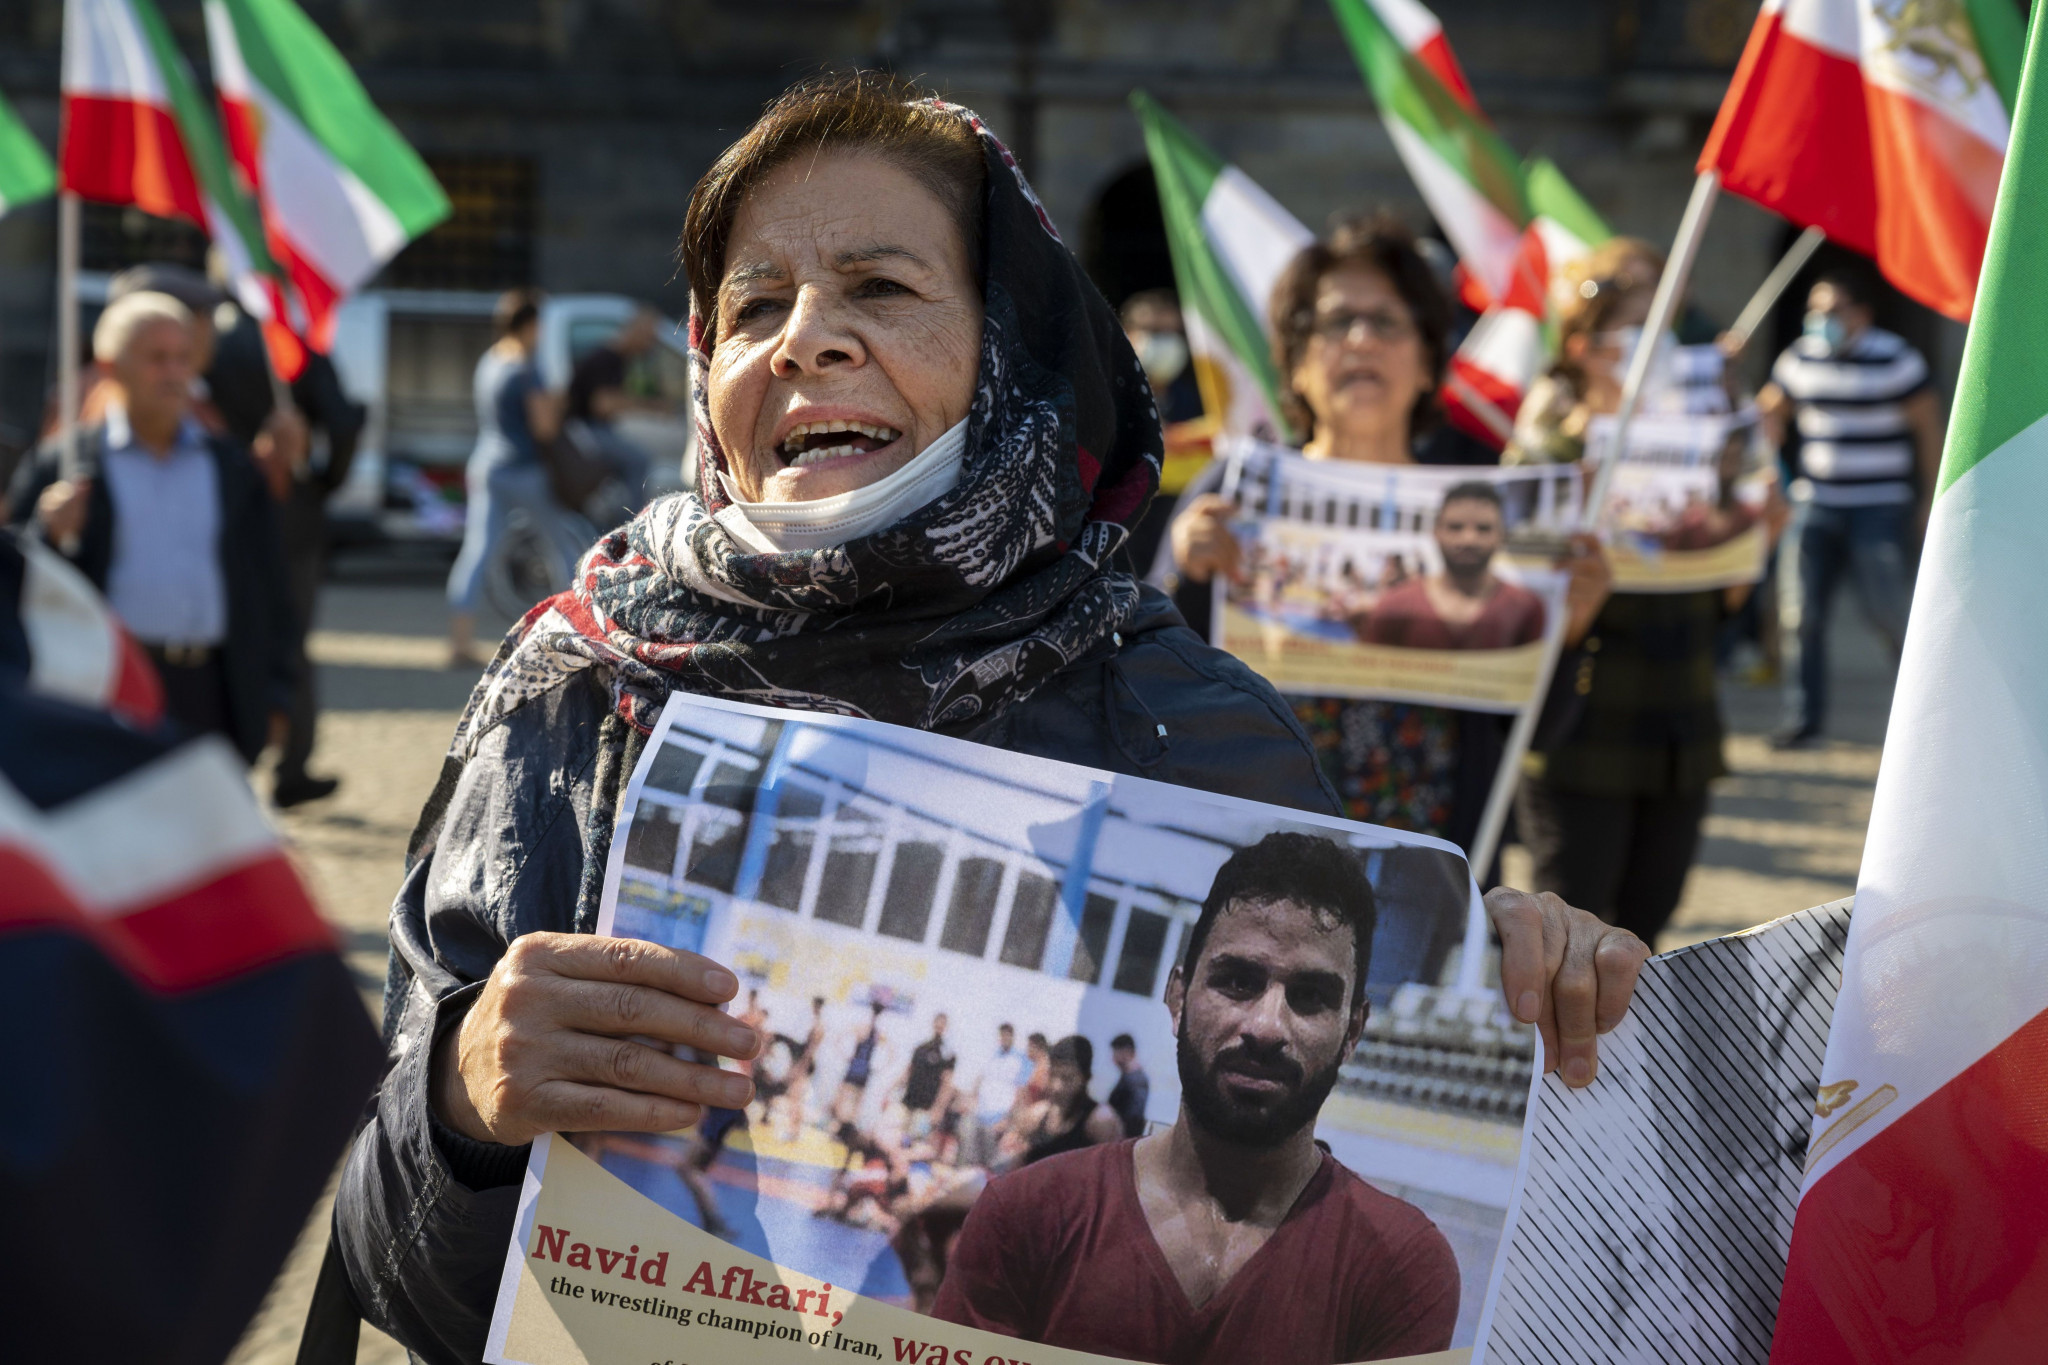 A demonstrator holds an image of Navid Afkari at a protest against the Iranian regime held in Dutch city Amsterdam ©Getty Images